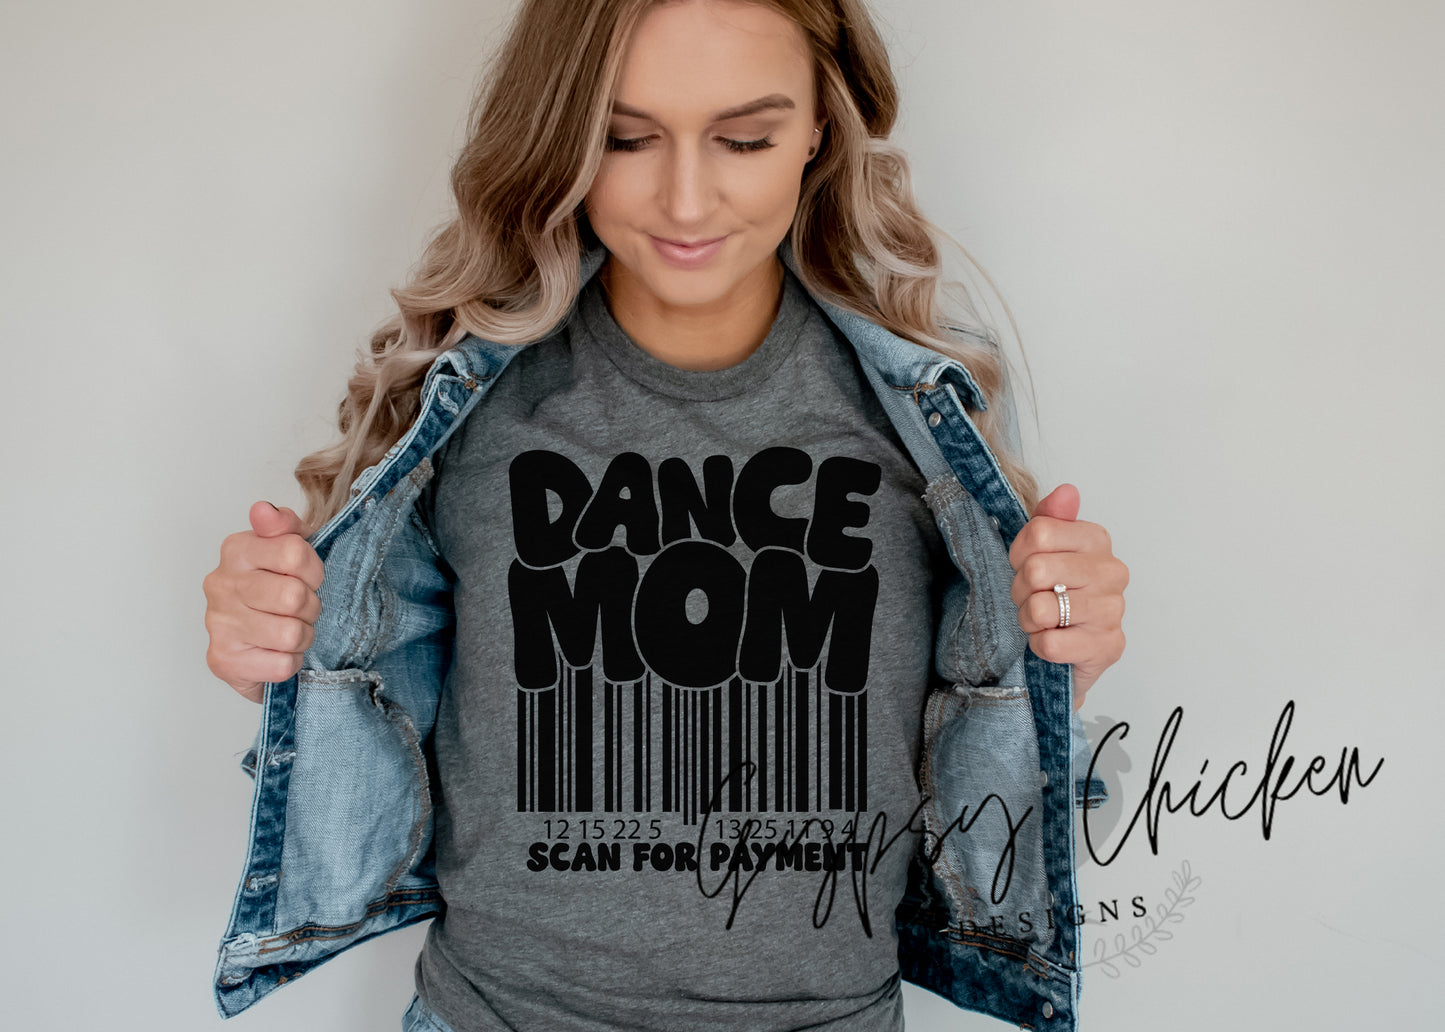 Dance Mom Scan for Payment